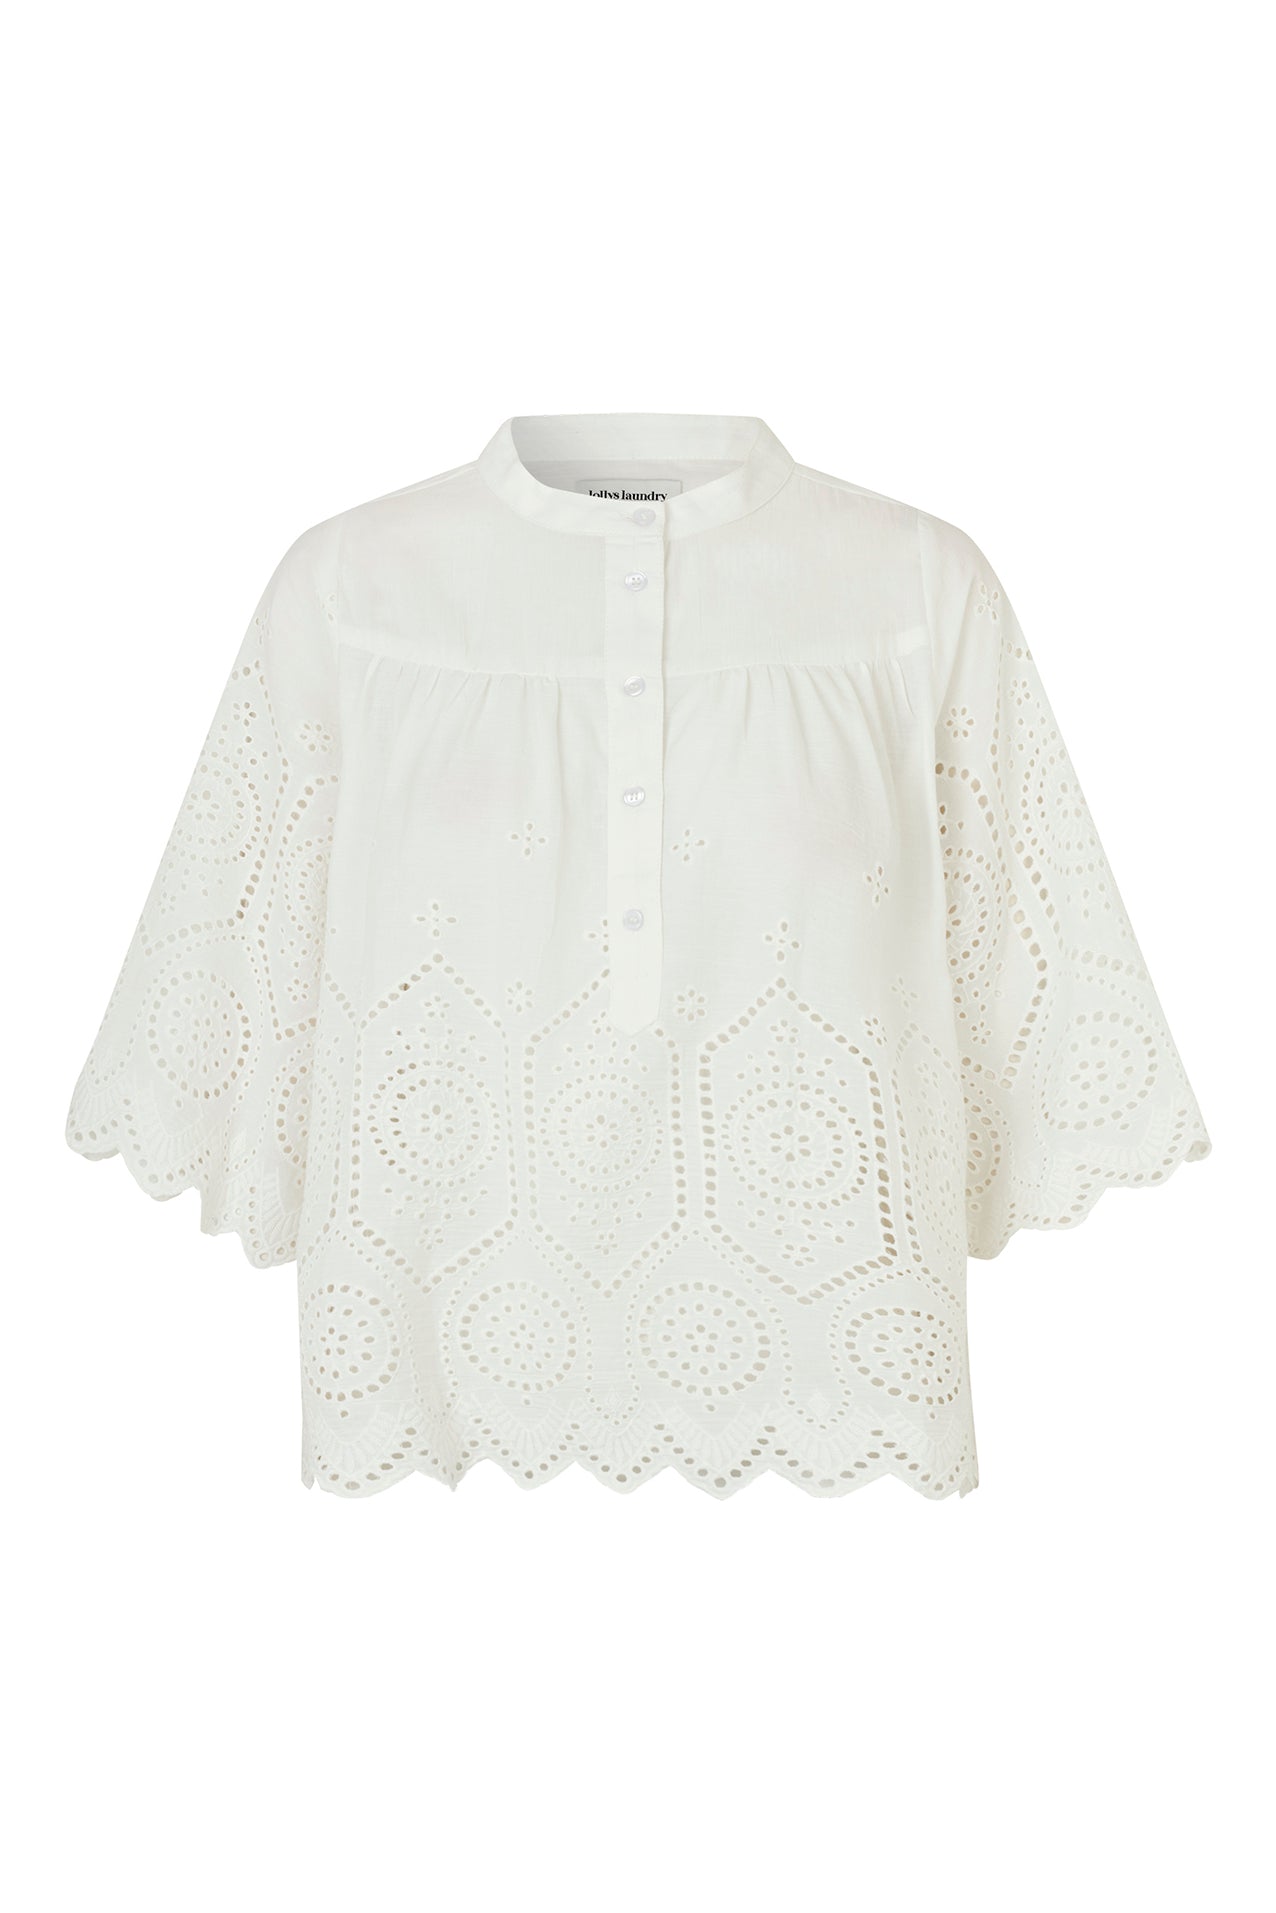 Lollys Laundry LouiseLL Blouse SS Shirt 01 White